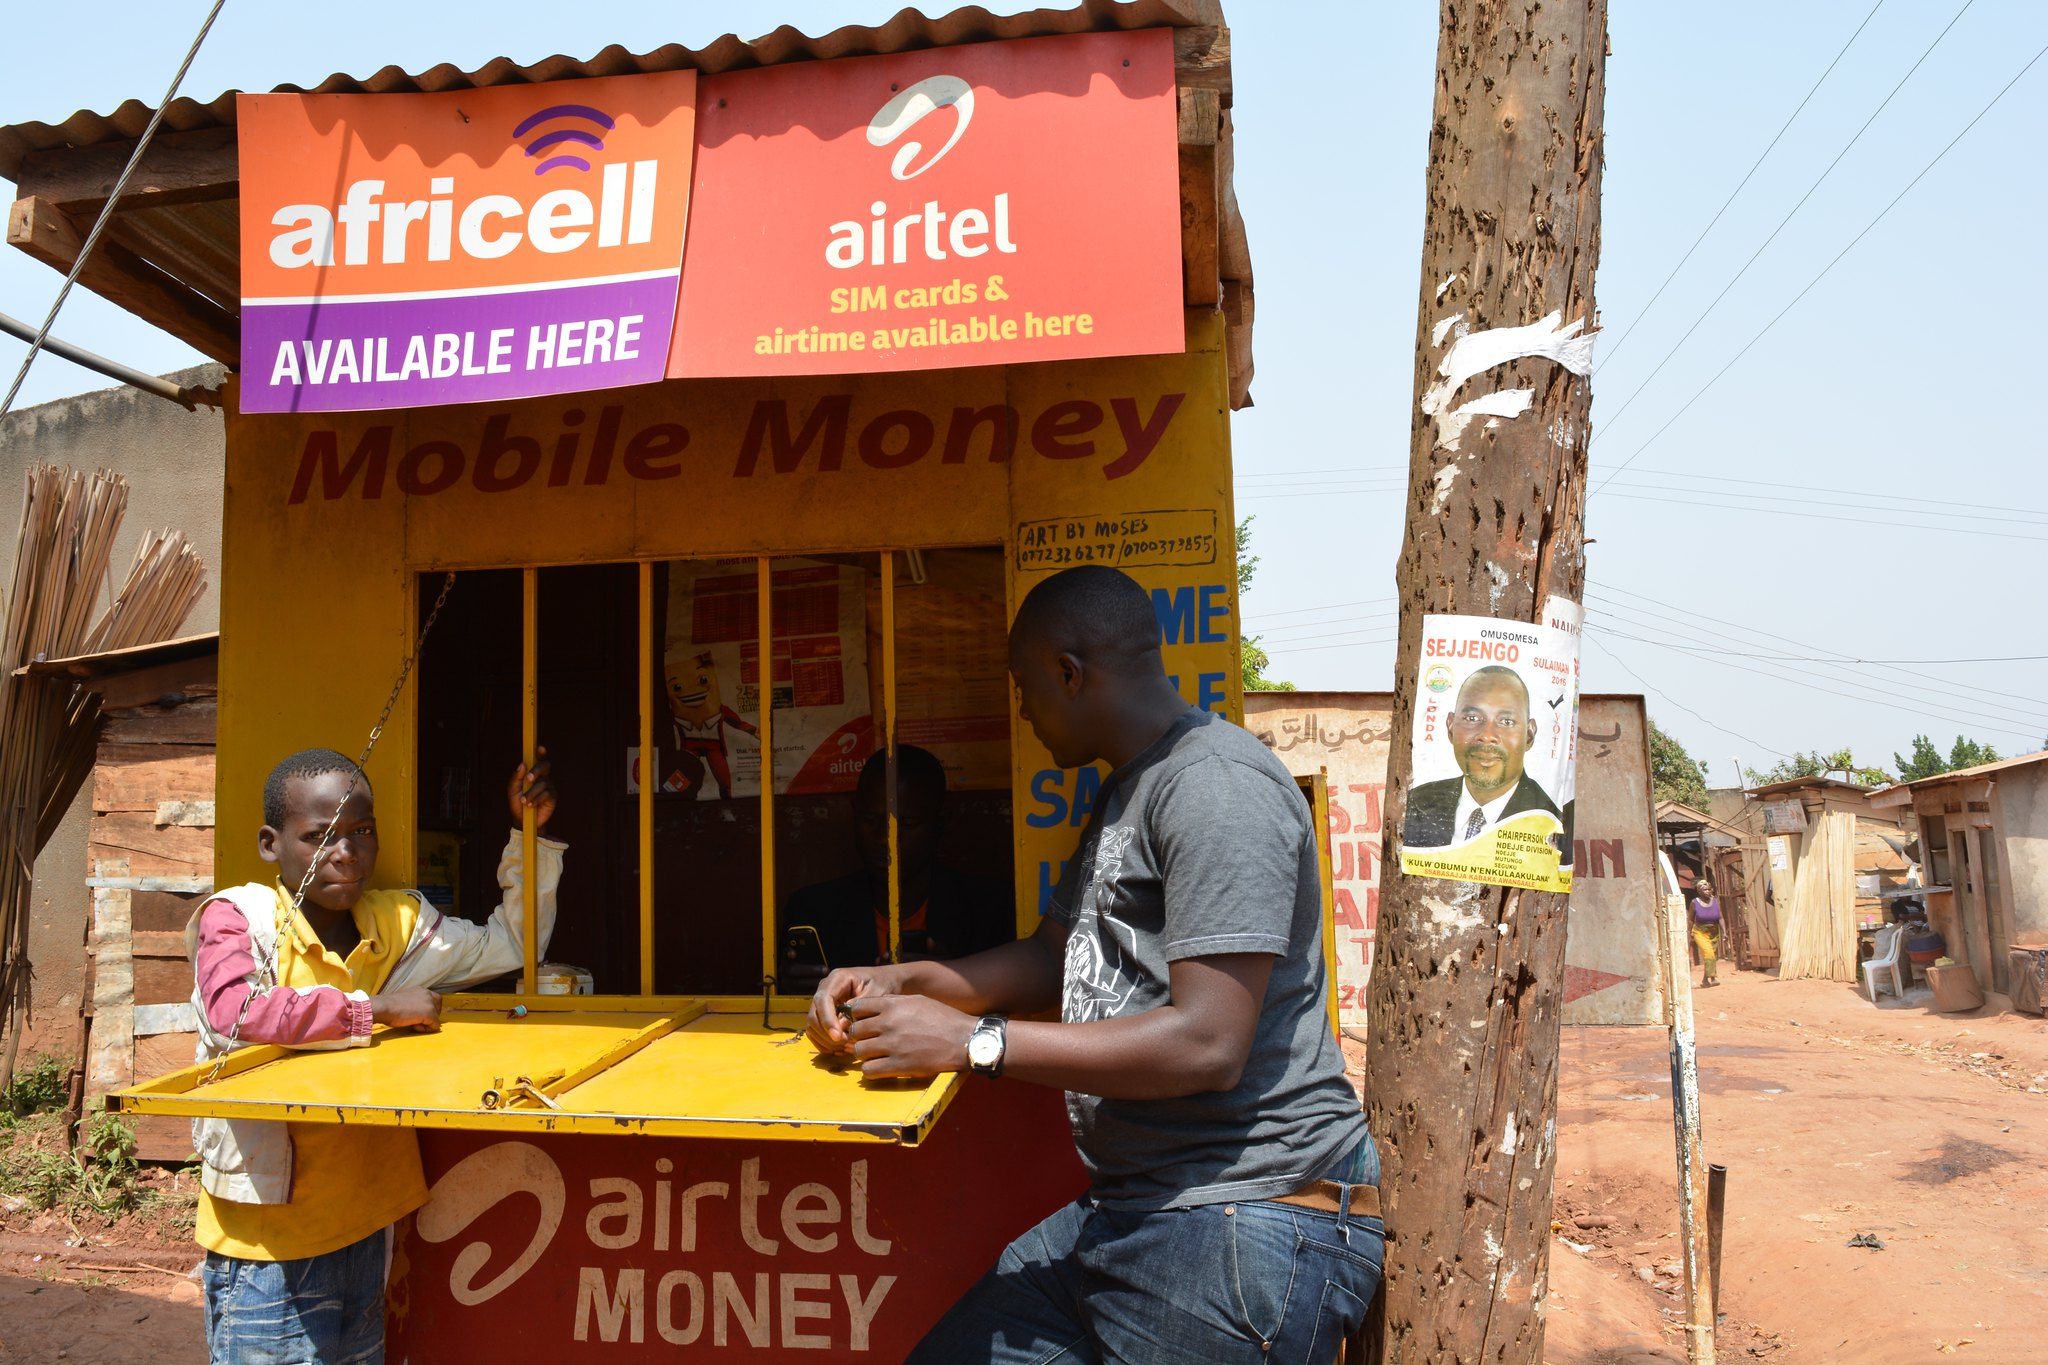 Mobile money is booming in Africa, but digital literacy is still lacking